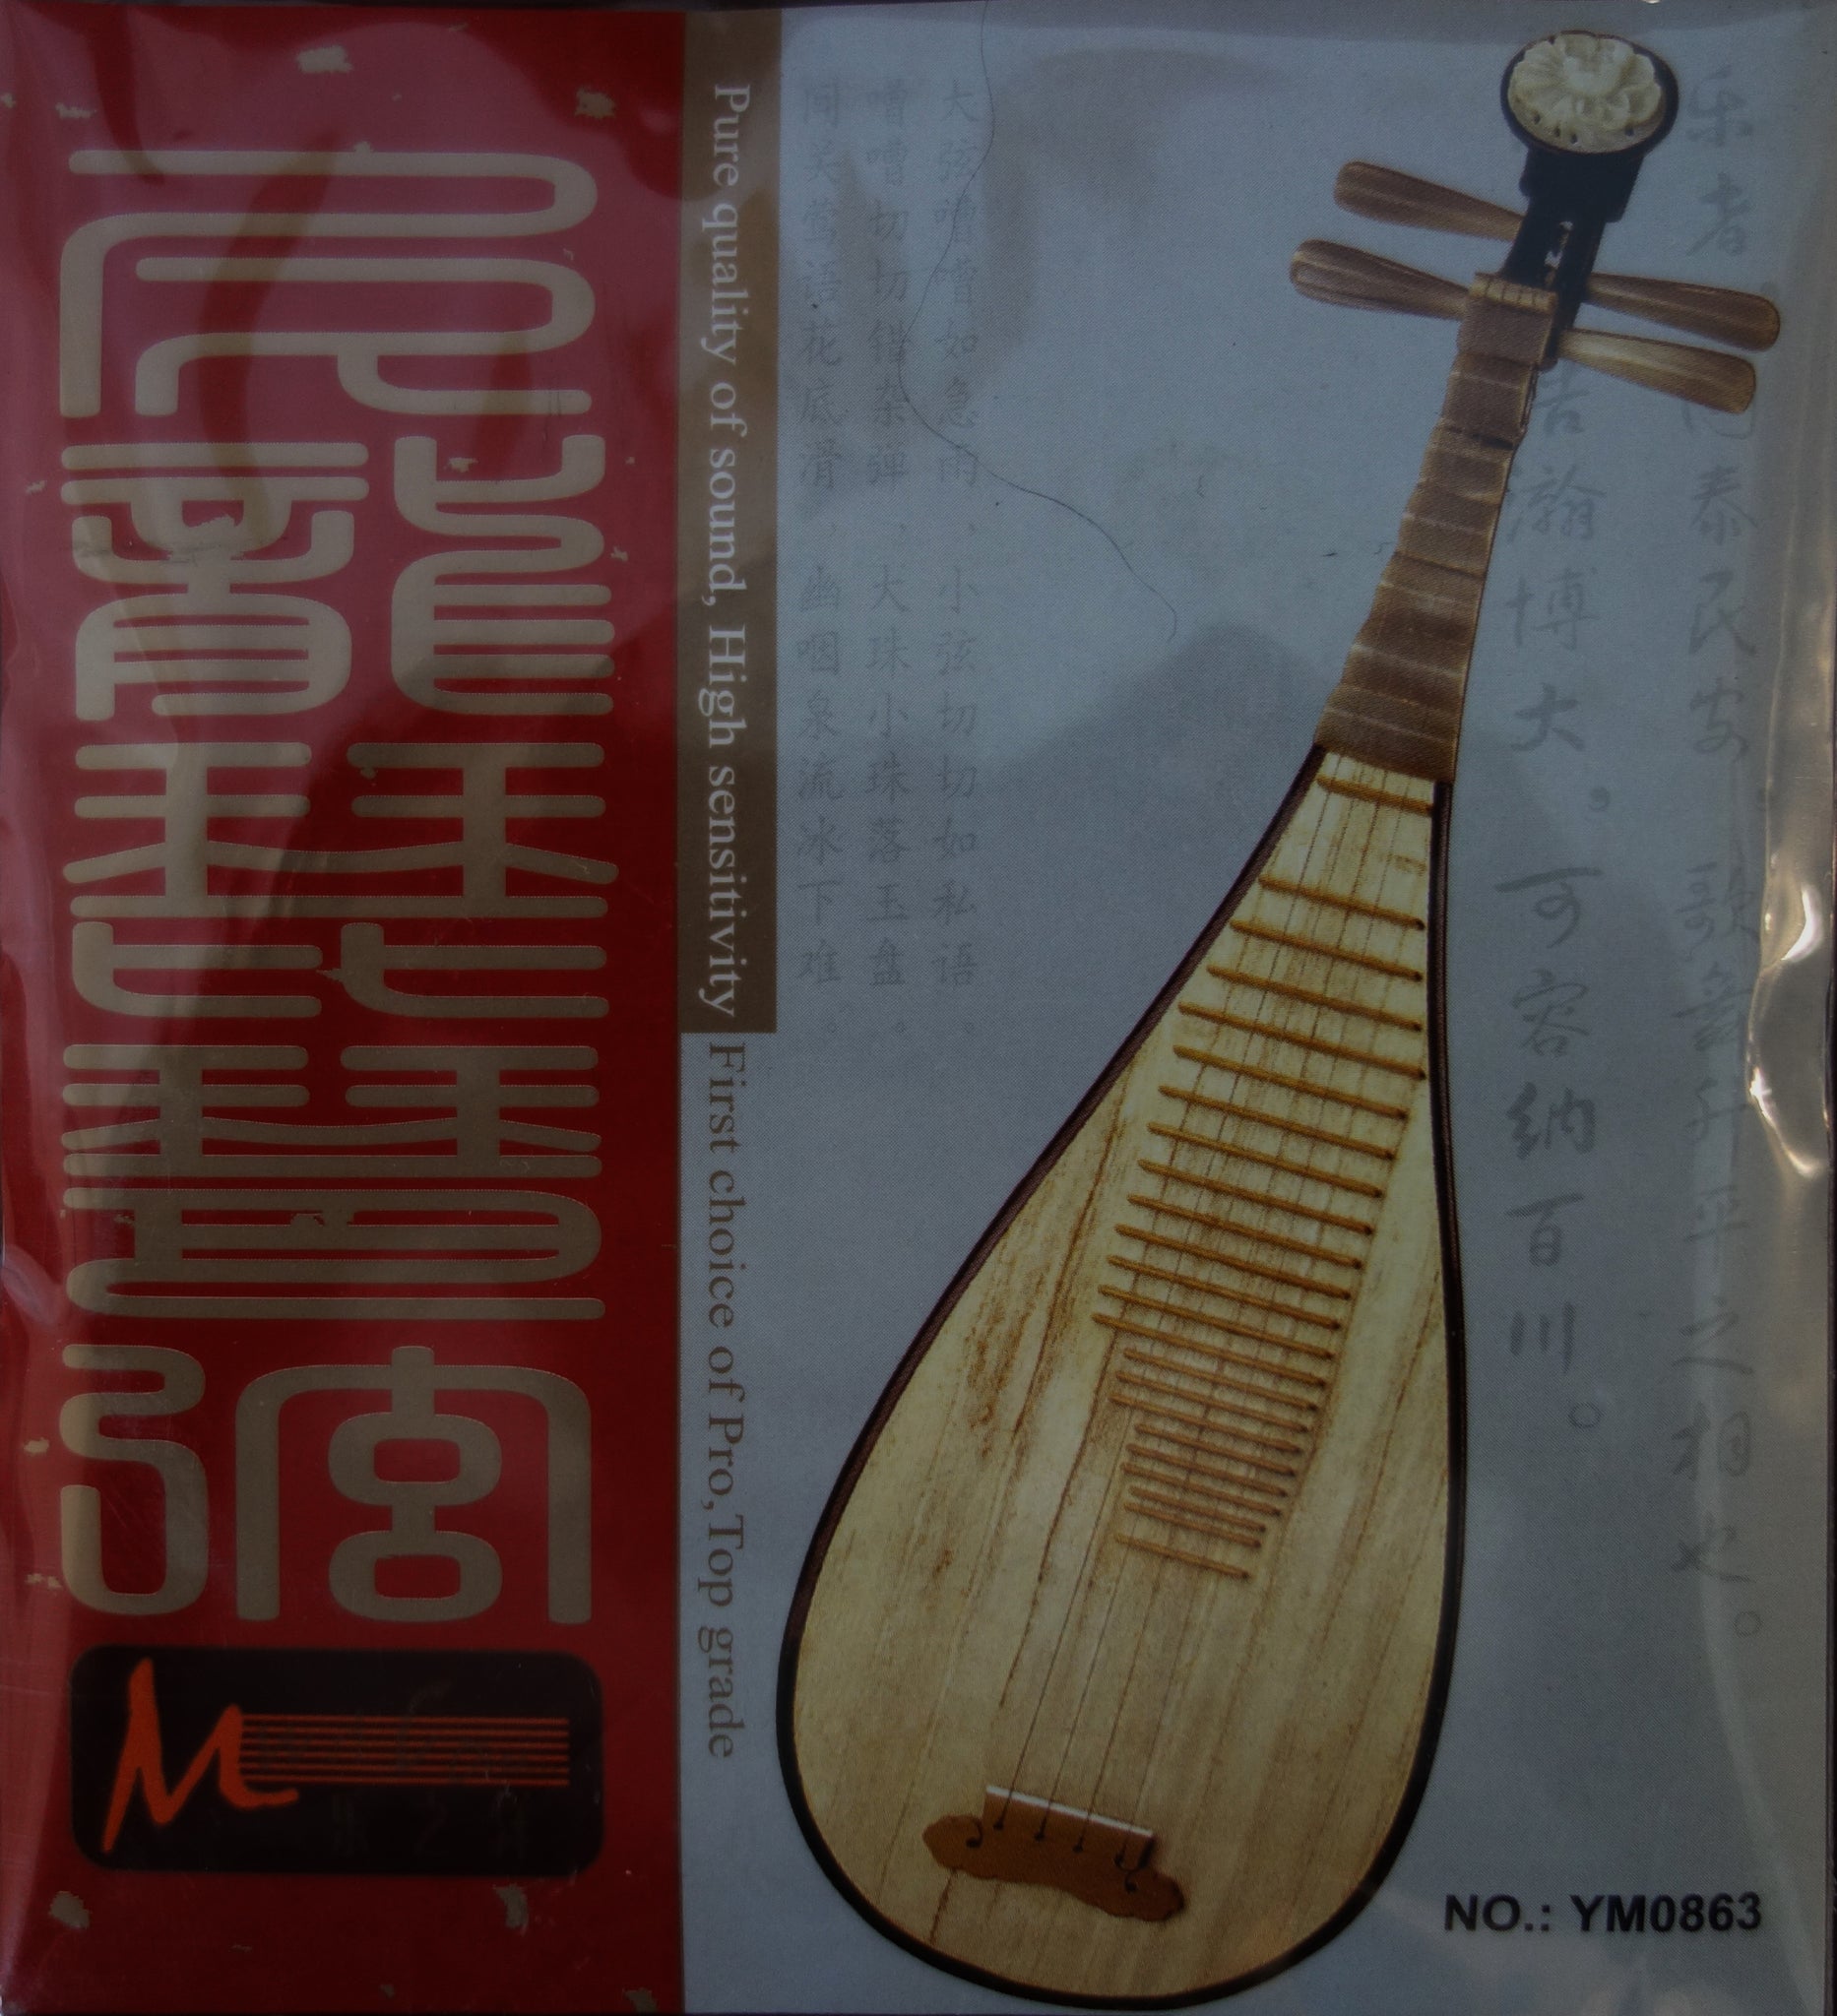 Strings for Pipa, HighEnd Nylon Wrapped, whole set (4 pieces) 高级尼龙合绳琵琶弦一套Free shipping